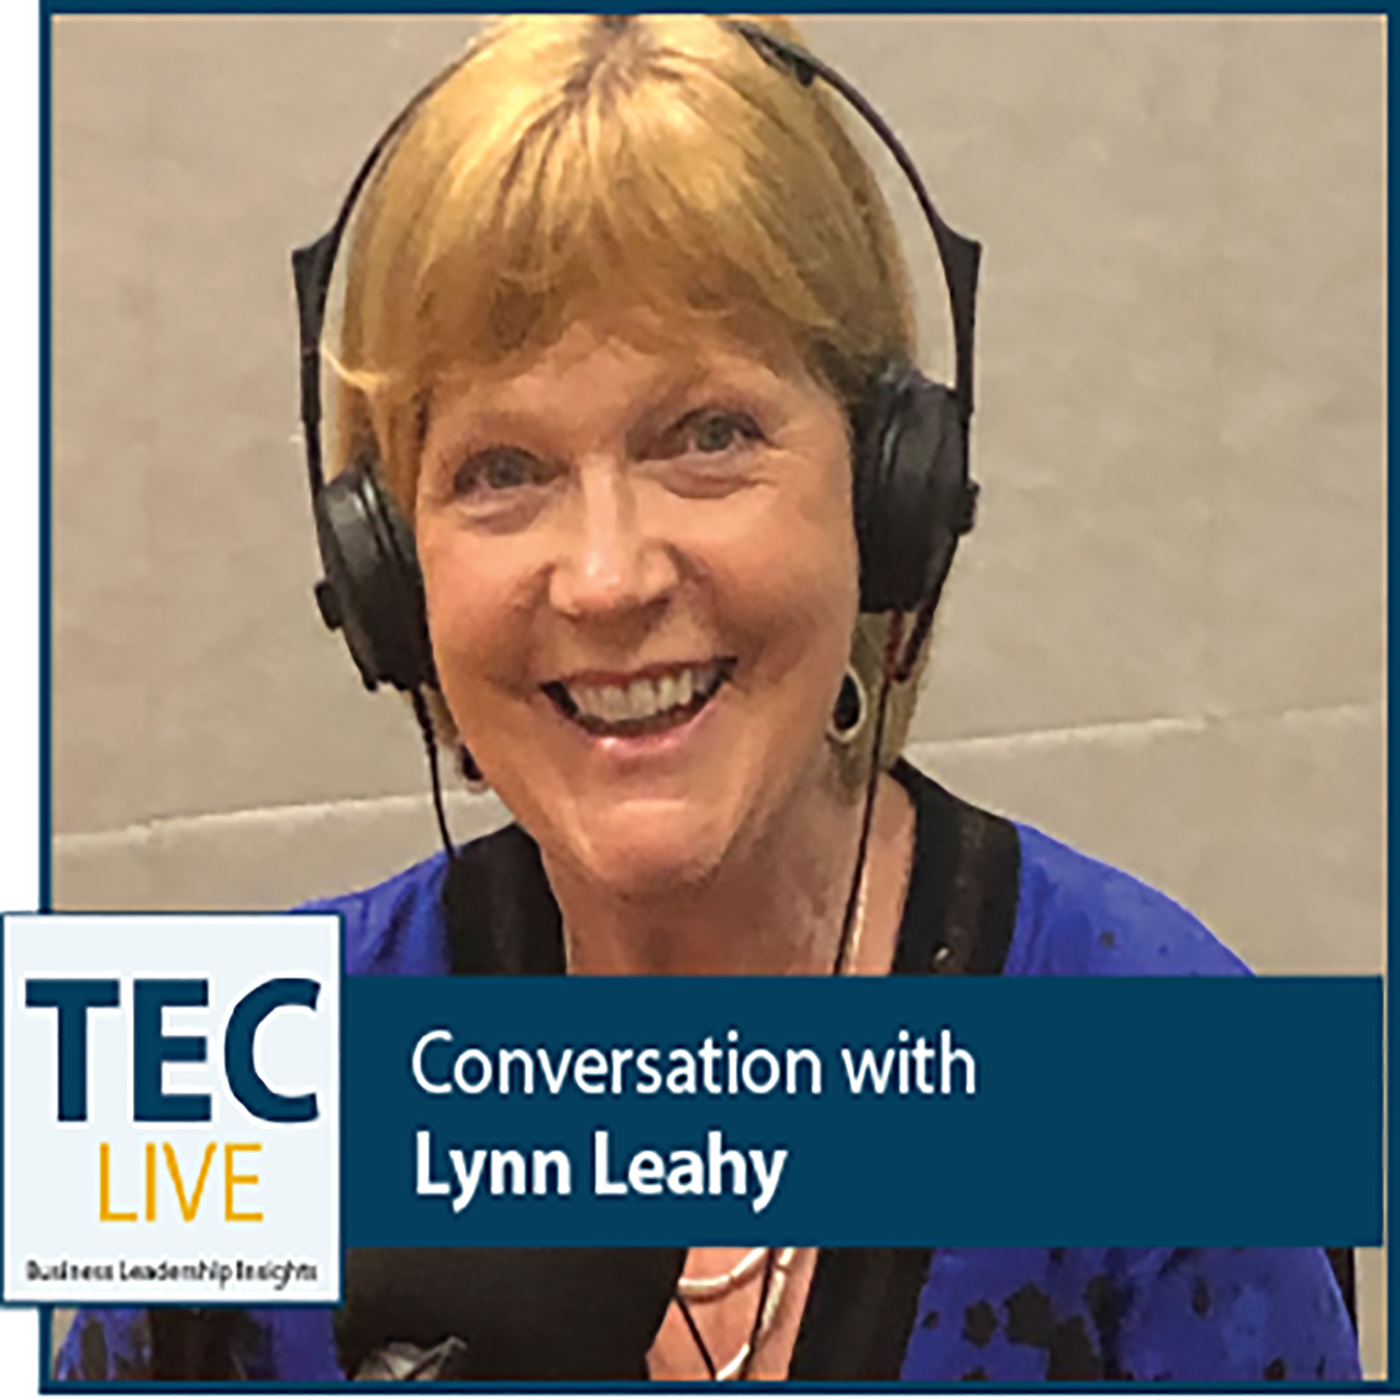 Coaching and Effective Leadership with Lynn Leahy